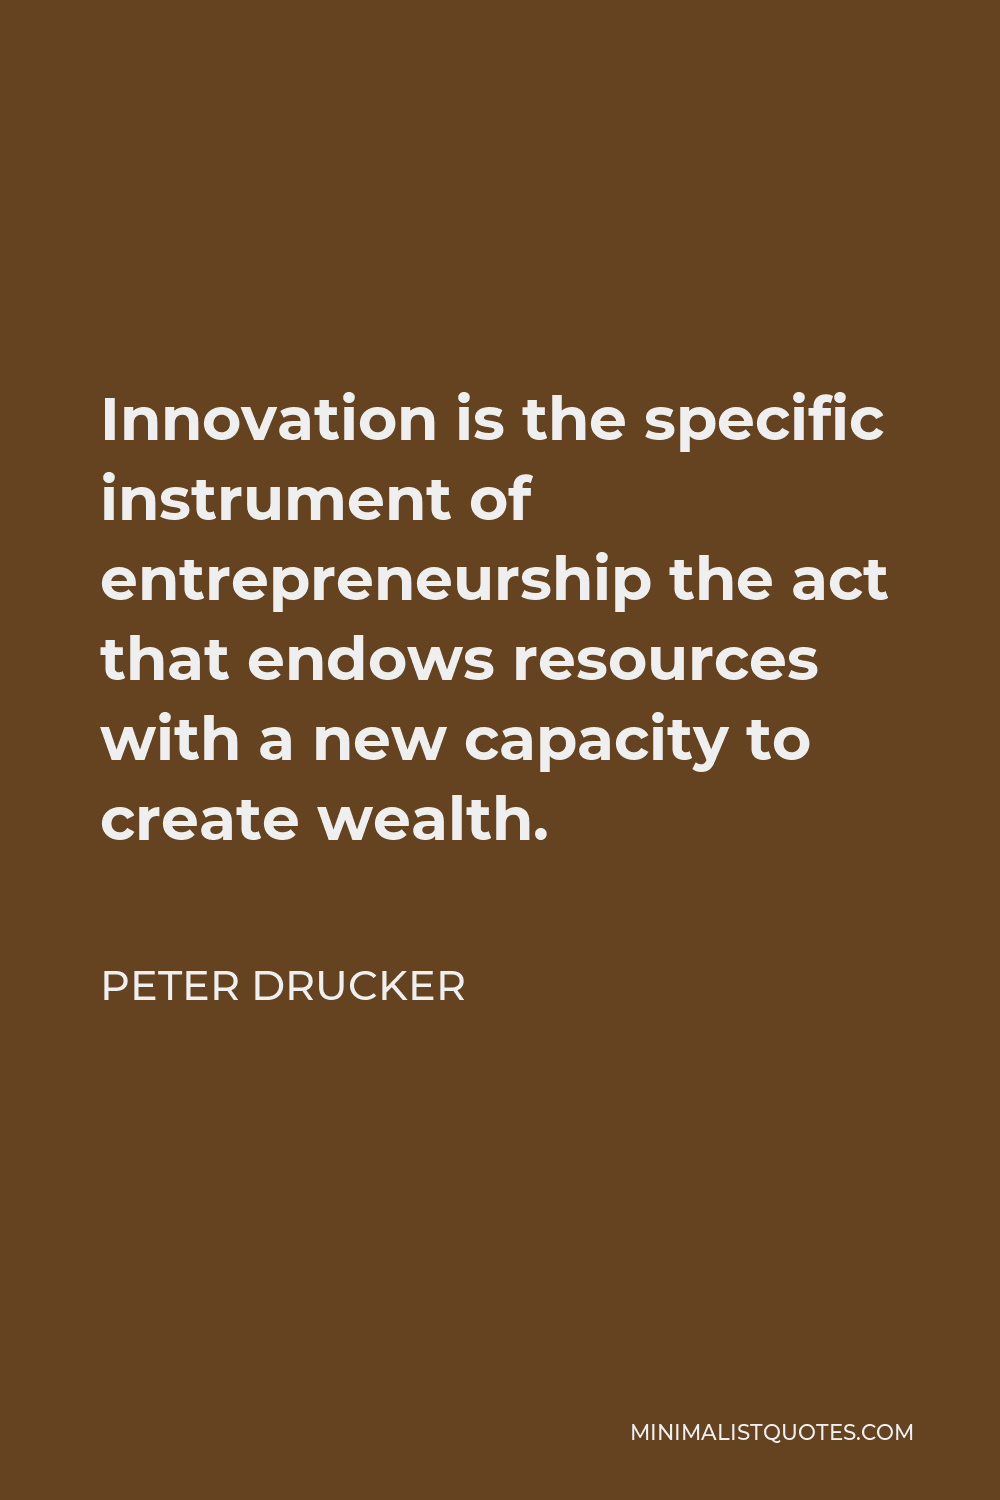 Peter Drucker Quote: Innovation is the specific instrument of ...